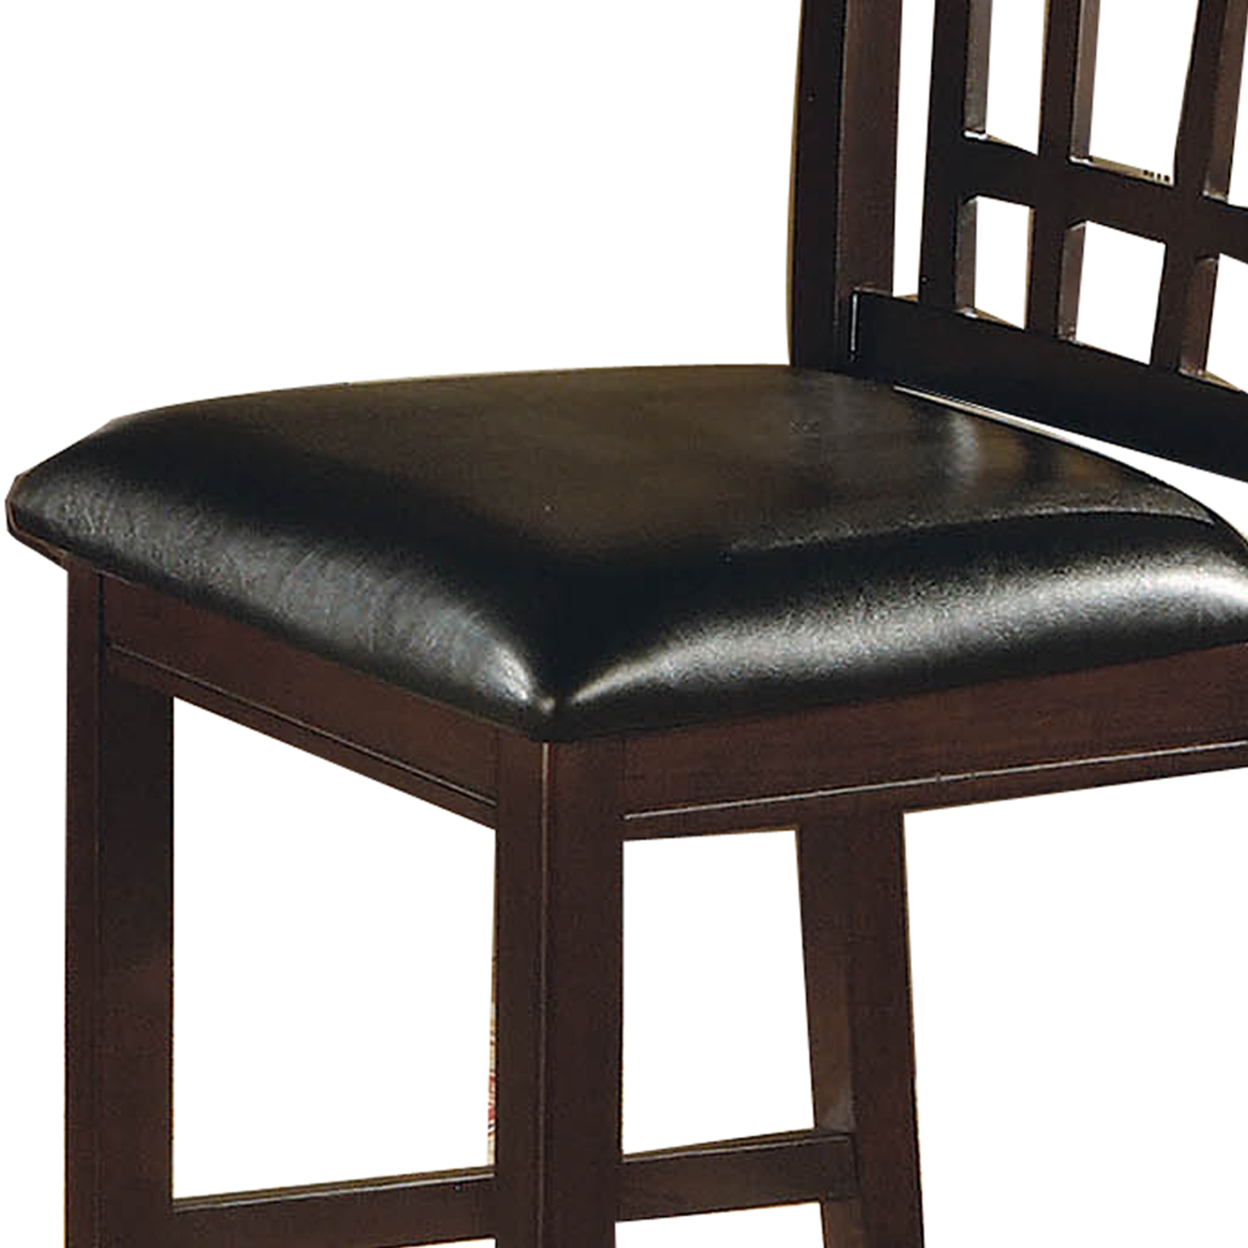 Lattice Back 24 Wooden Counter Height Chair With Leatherette Seat, Set Of 2, Brown And Black- Saltoro Sherpi